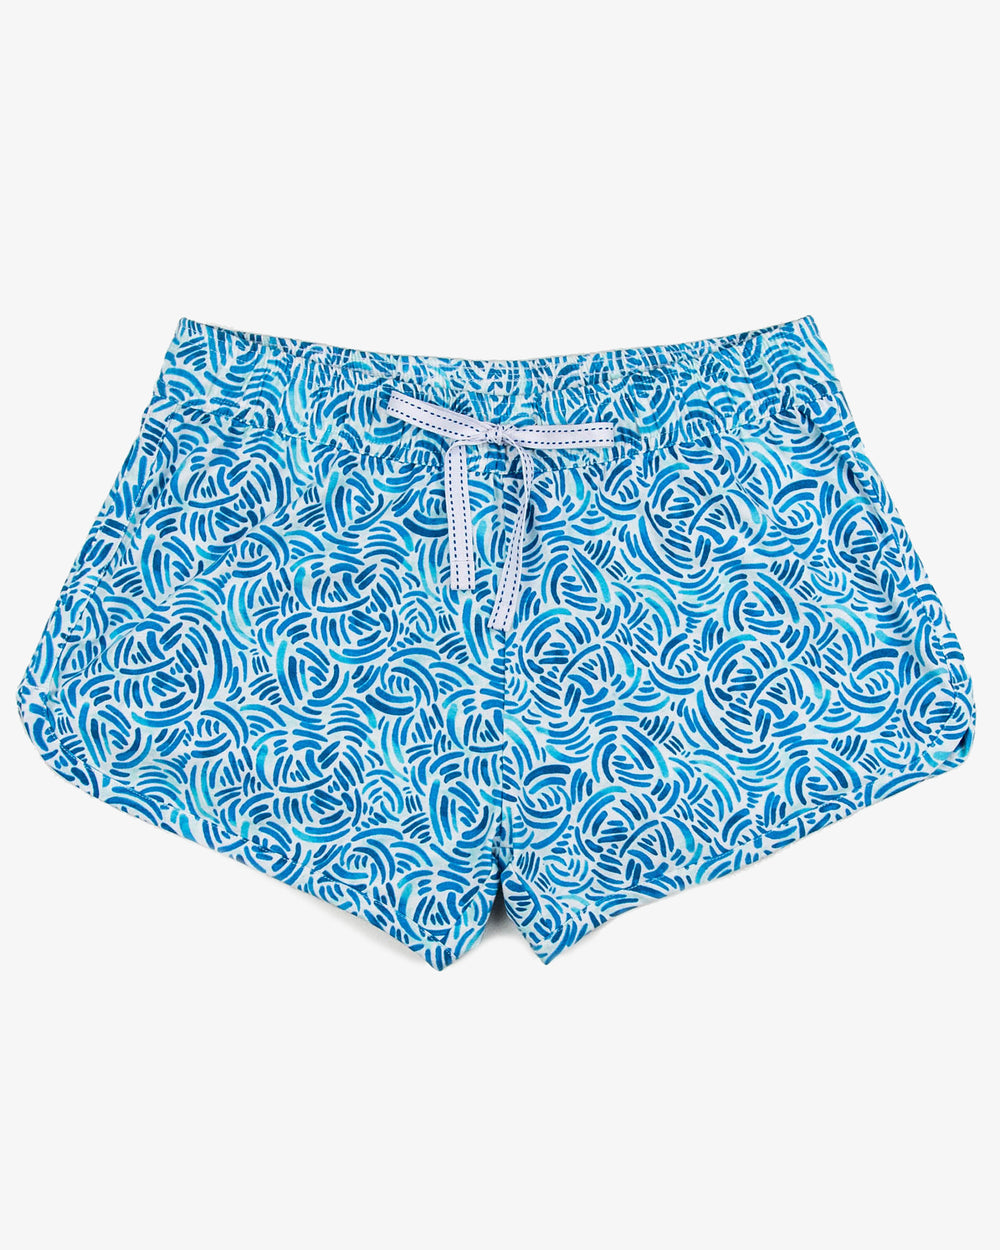 The front view of the Southern Tide Watercolor White Print Lounge Short by Southern Tide - Atlantic Blue